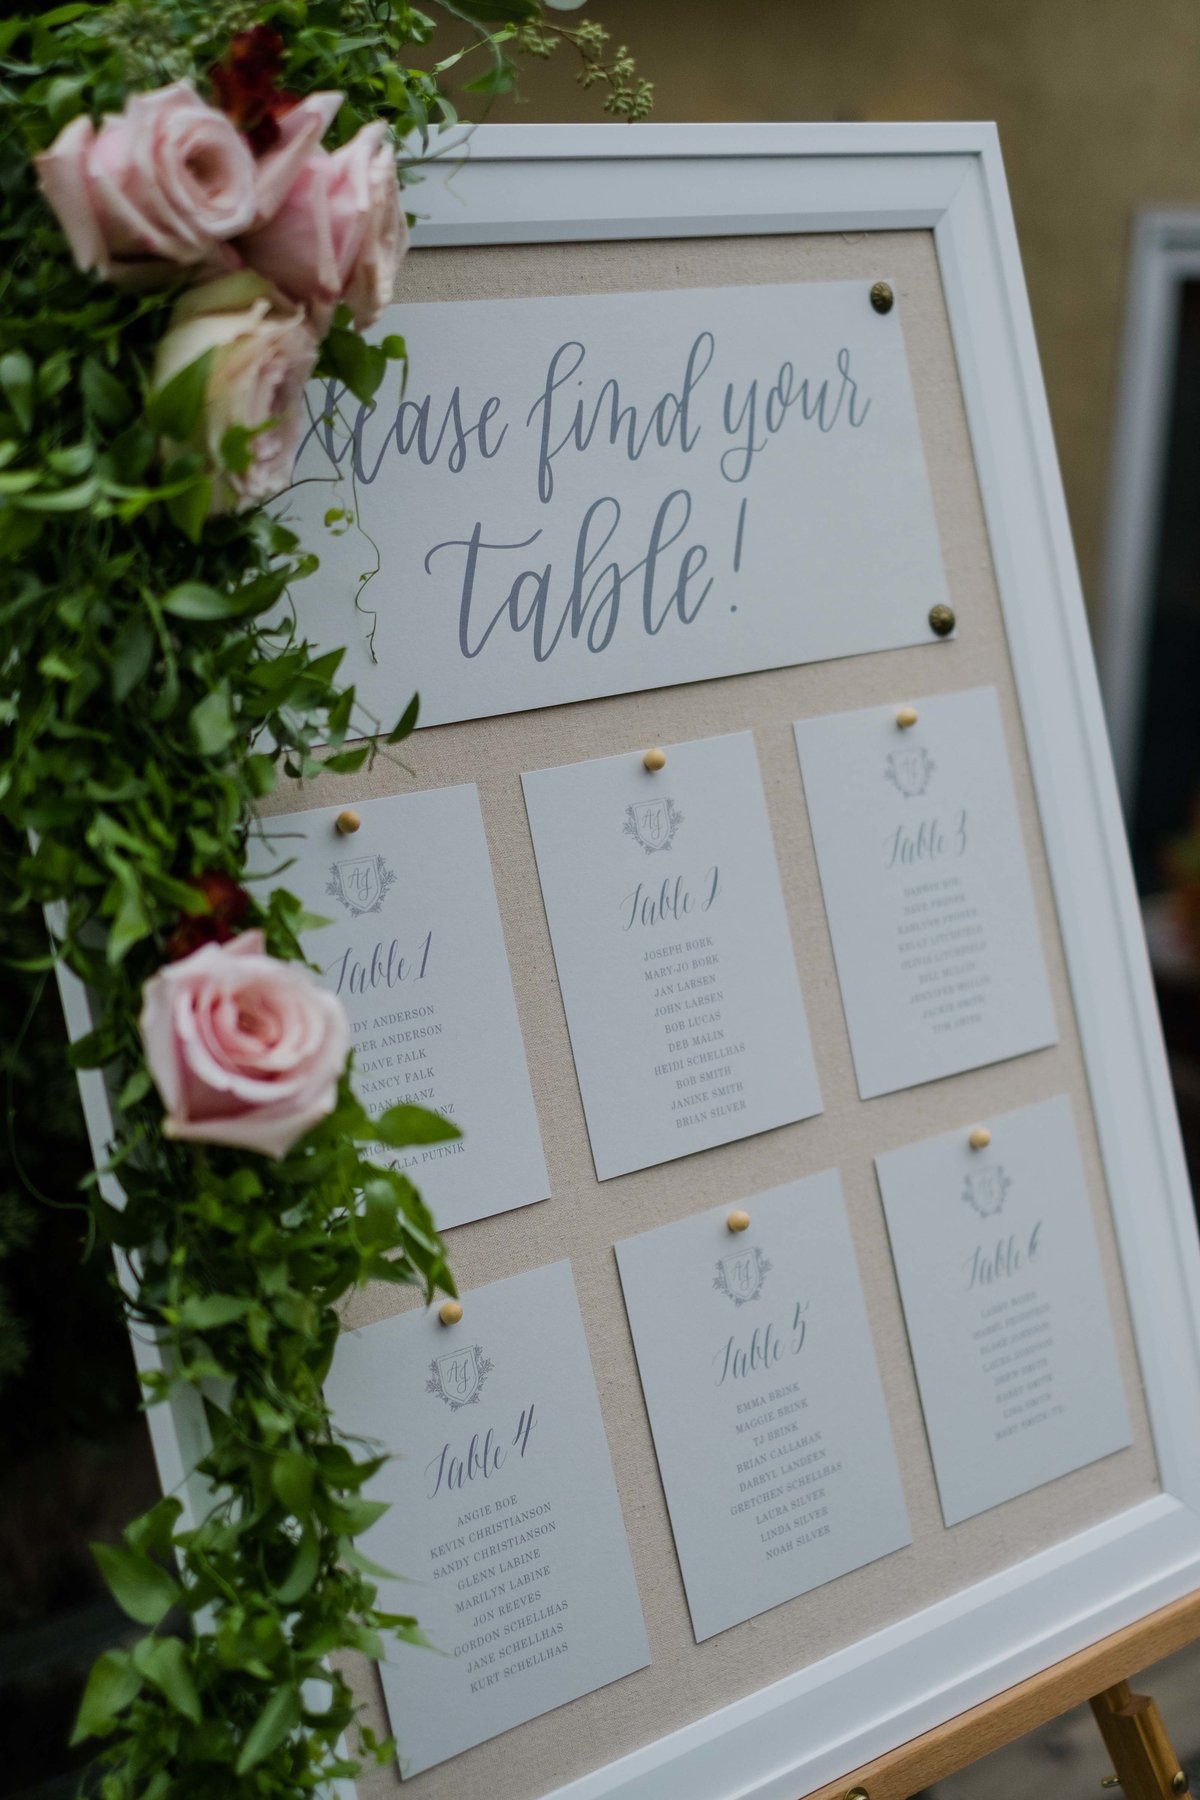 Calligraphy escort card board with smilax and roses decorating the frame.